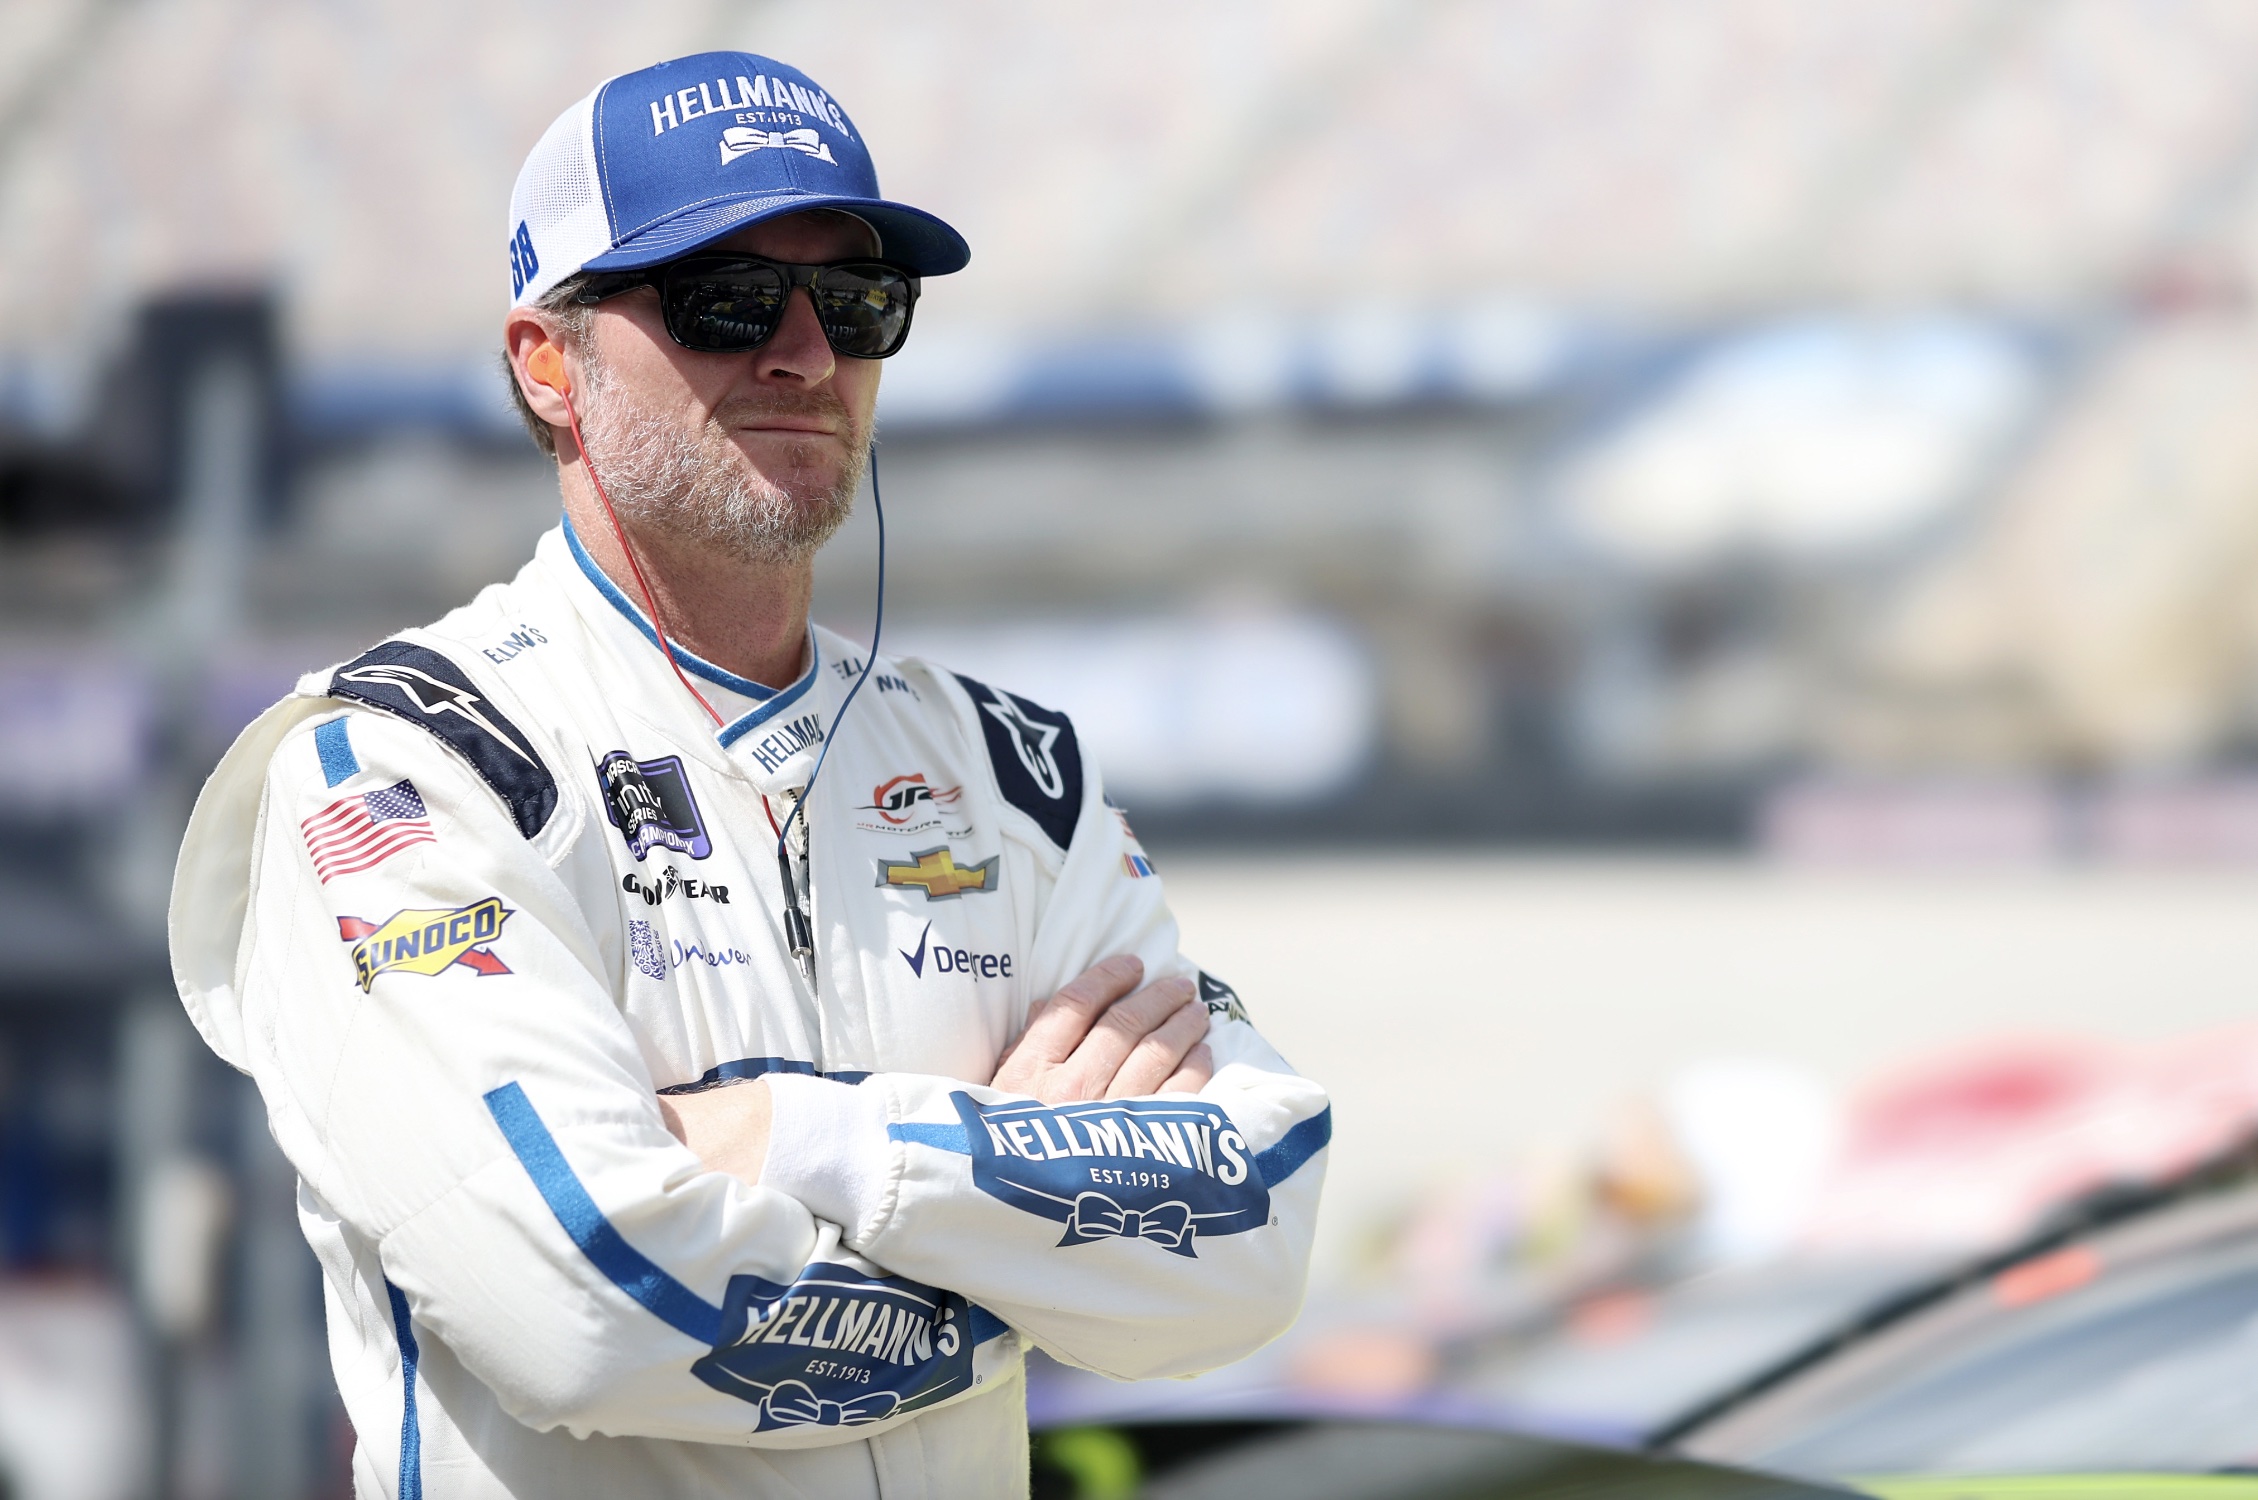 Dale Earnhardt Jr Hired by TNT Sports, Prime Video for 2025